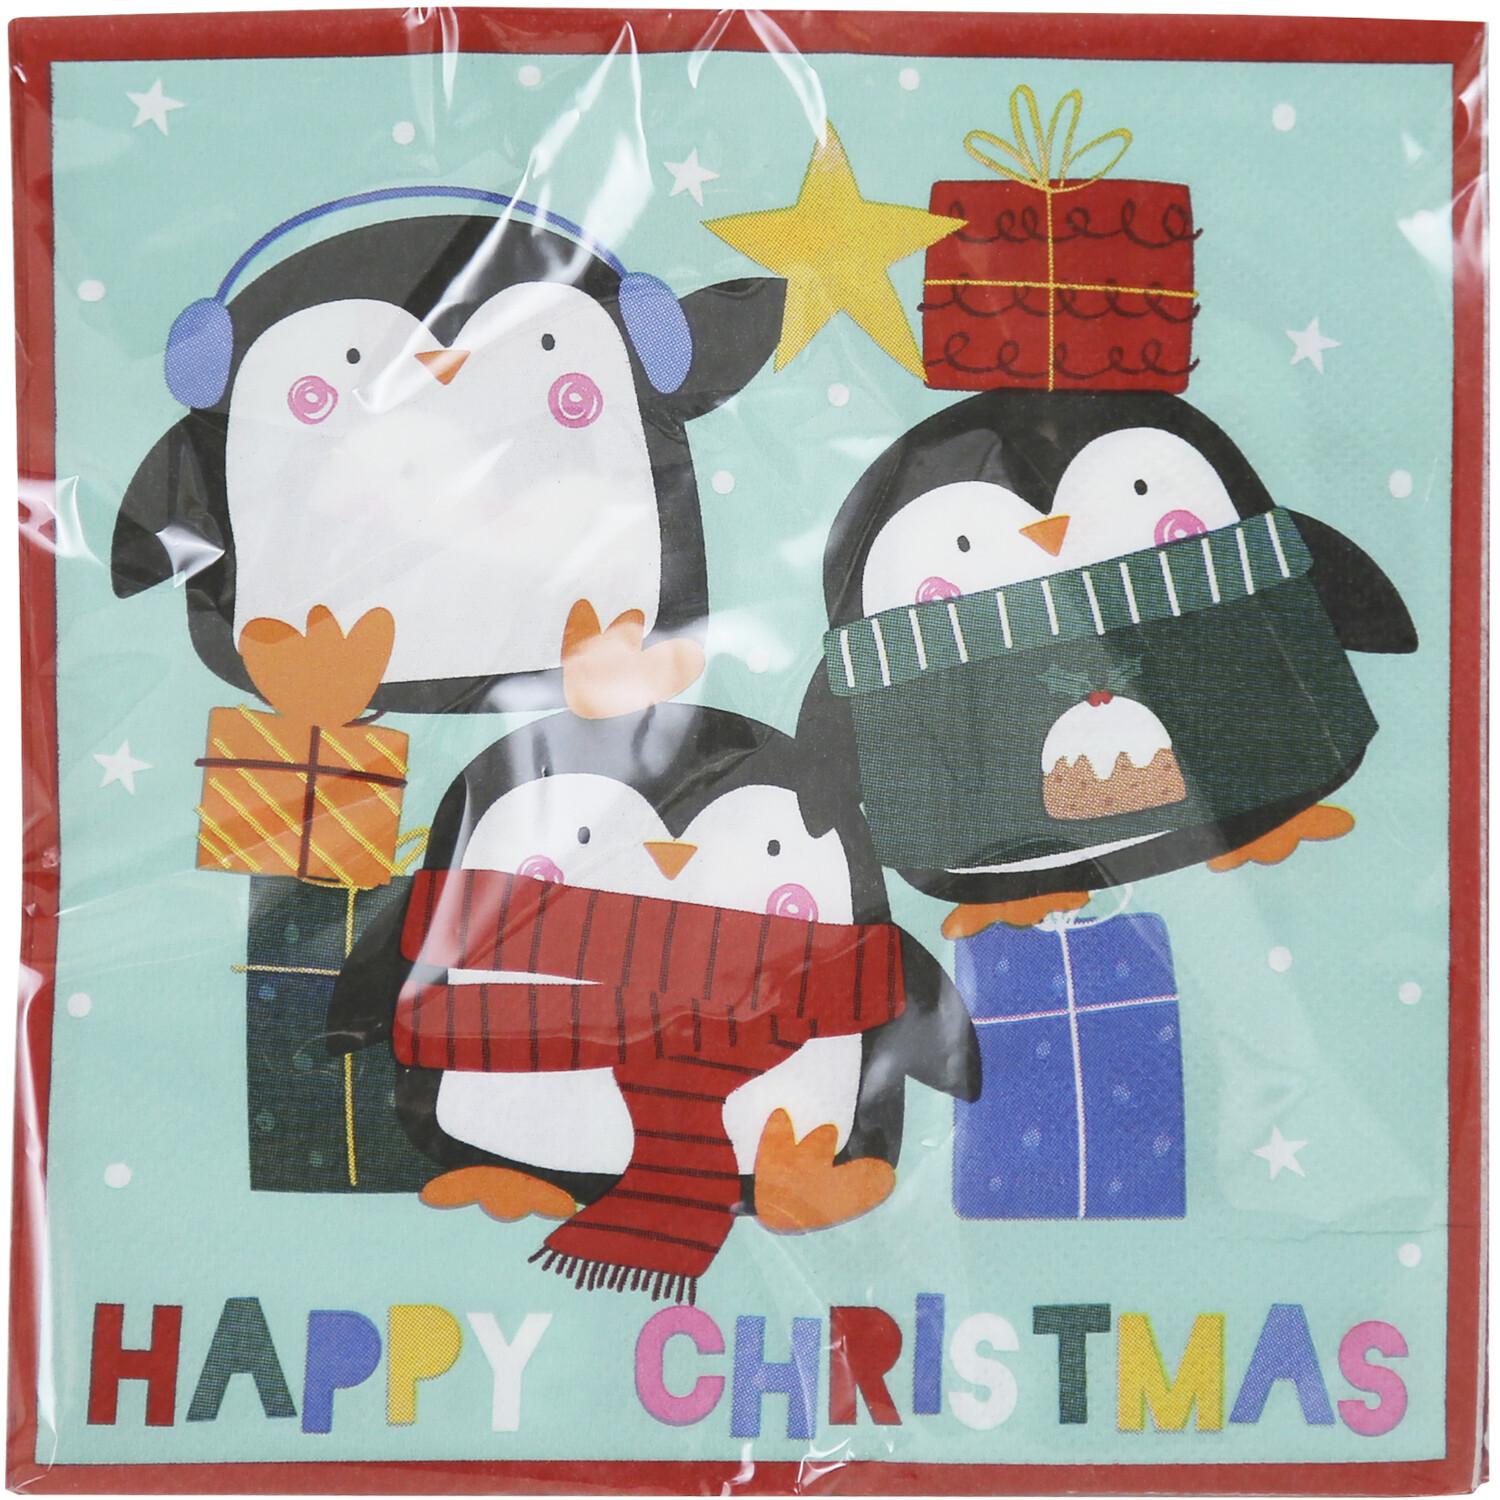 25-Piece Christmas Party Pack Image 1